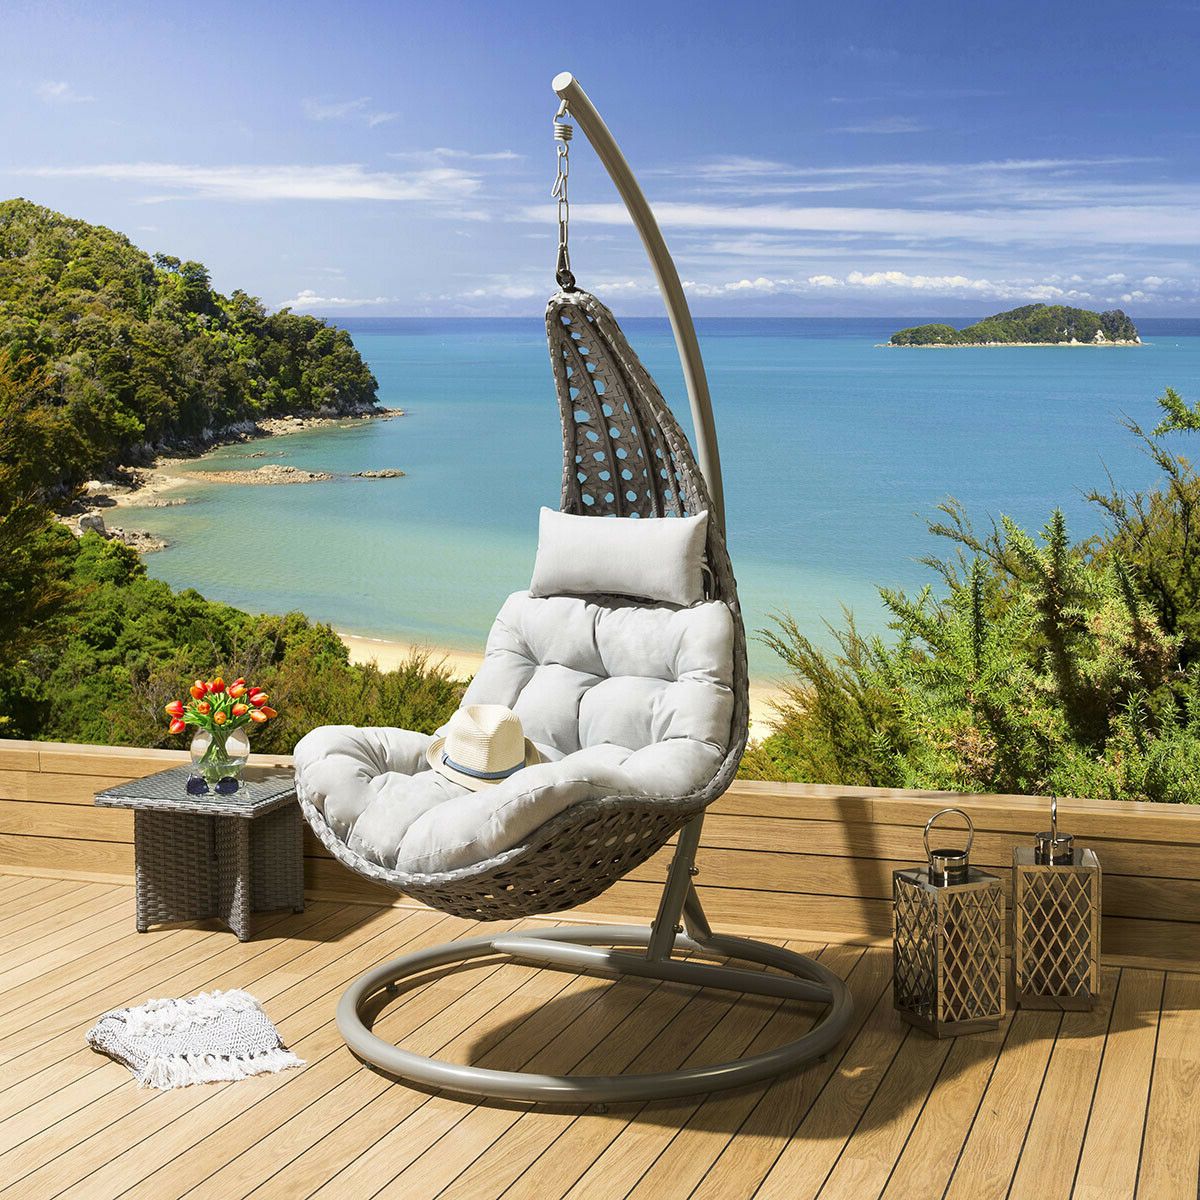 Preferred Rattan Garden Swing Chairs With Regard To Luxury Outdoor Modern Garden Hanging Swing Chair Grey Rattan Cover Inc (View 31 of 31)